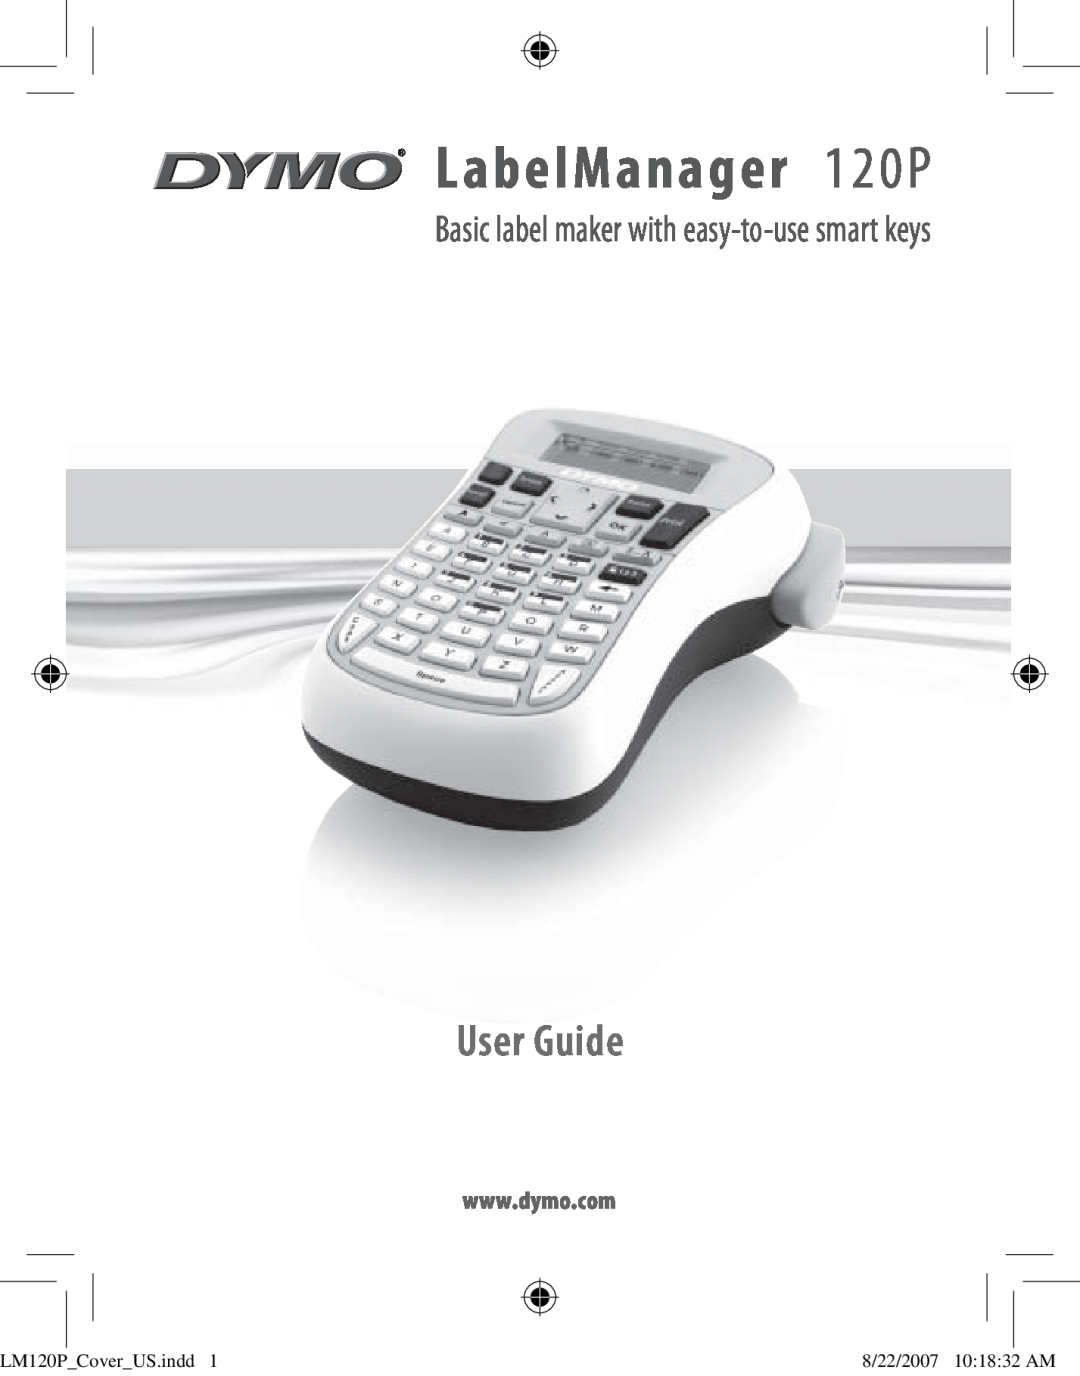 Dymo manual LabelManager 120P, User Guide, Basic label maker with easy-to-use smart keys, LM120PCoverUS.indd 